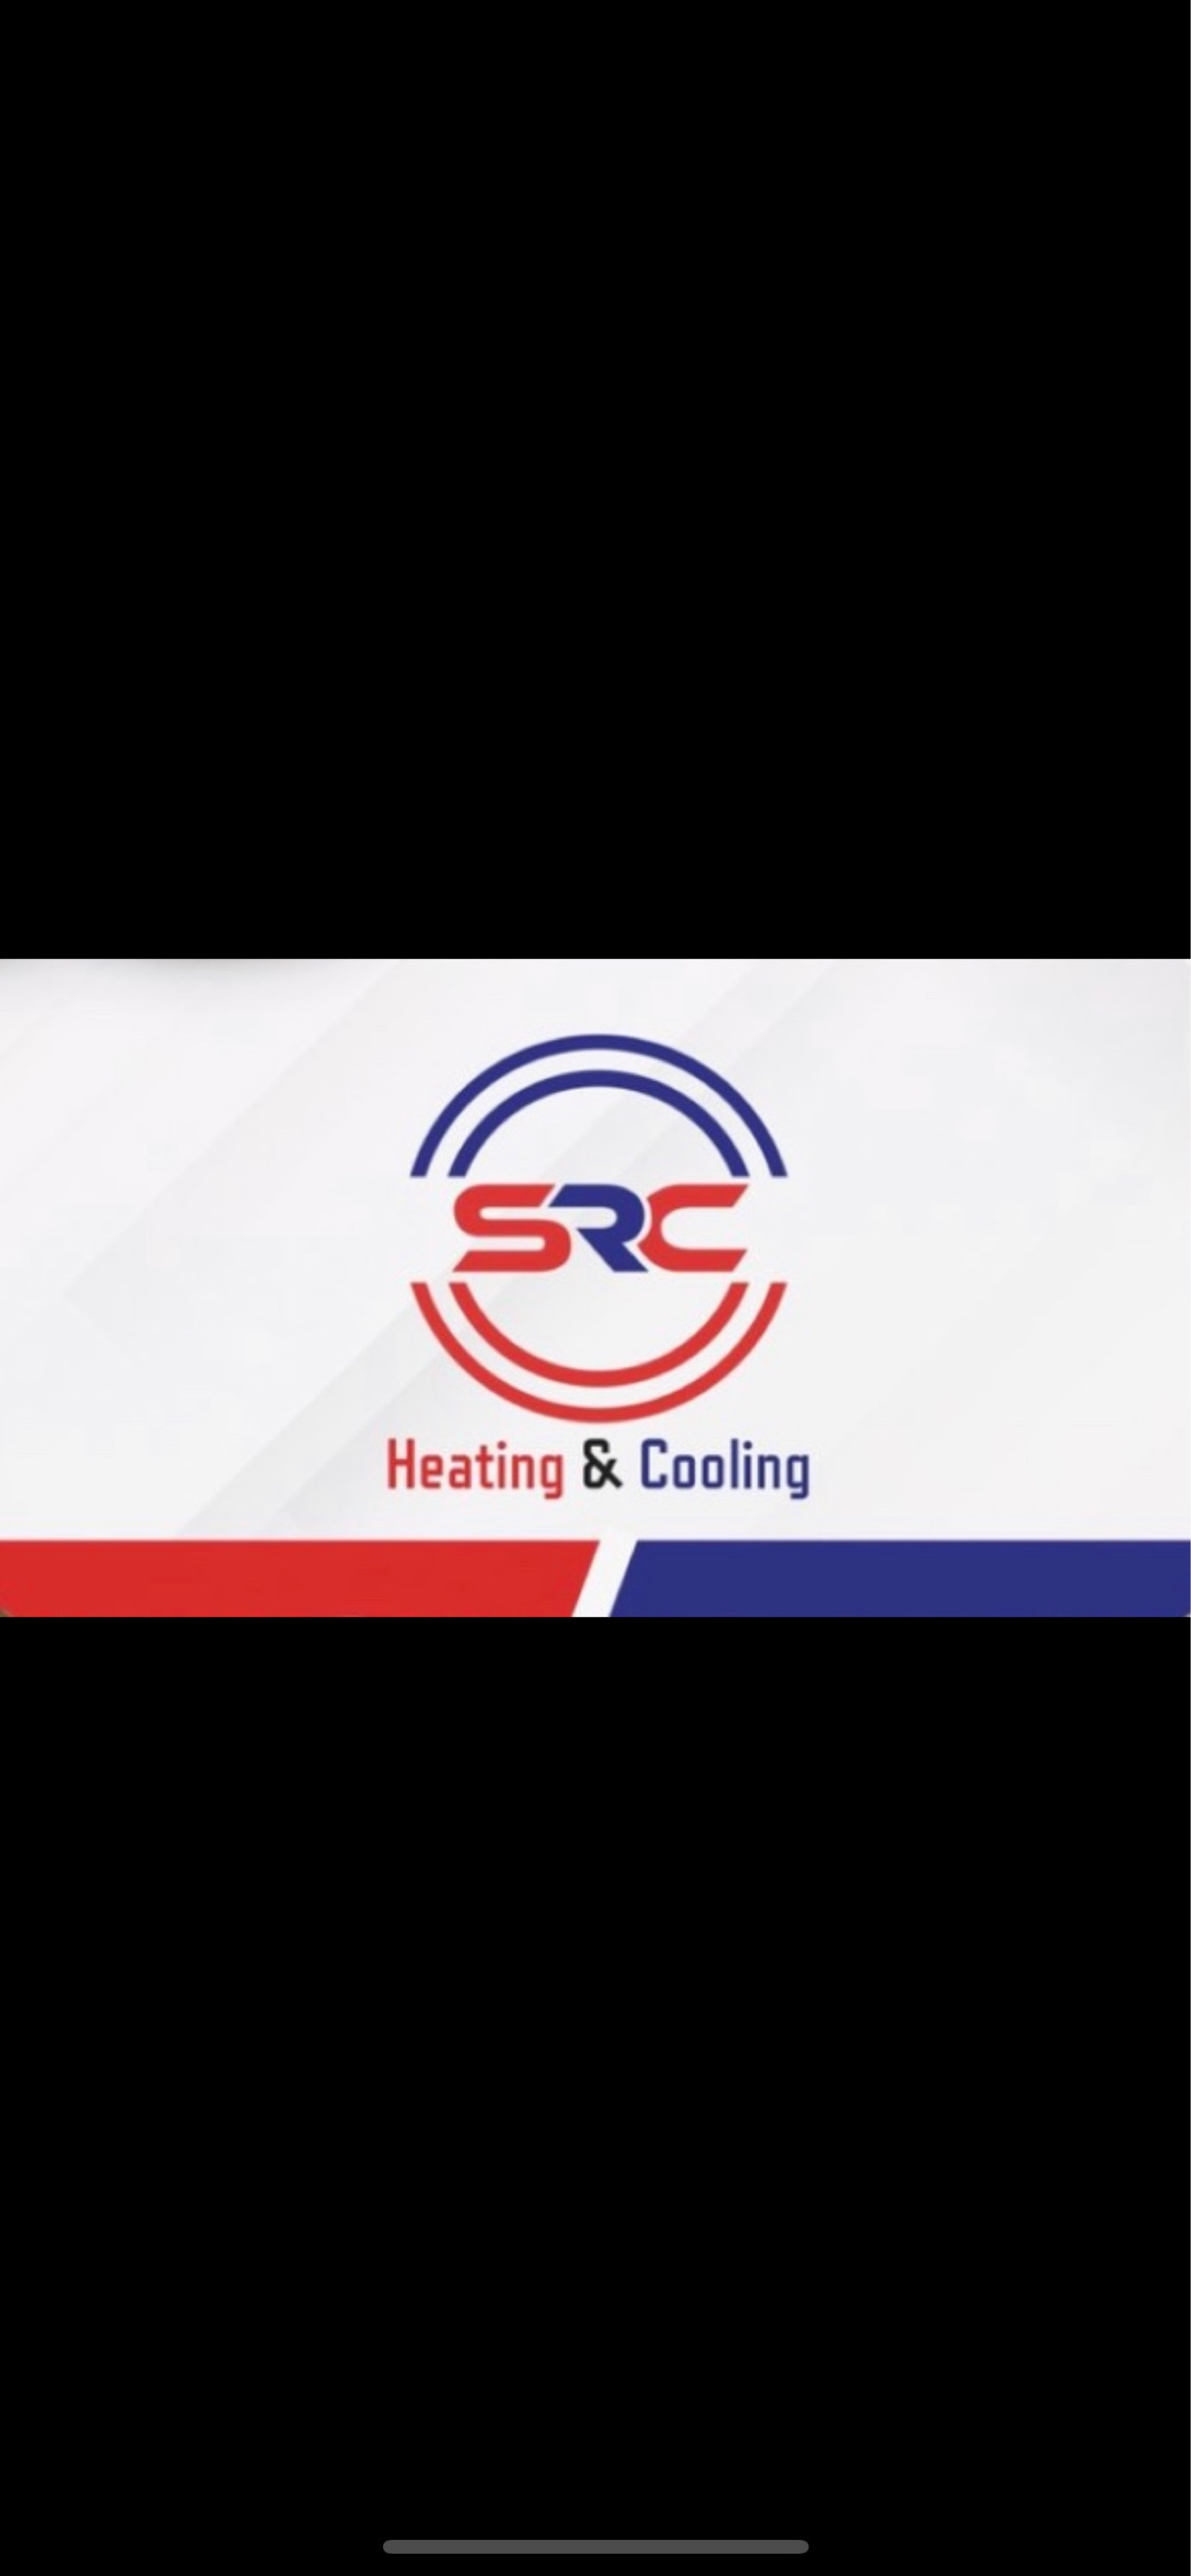 SRC Heating & Cooling Services, Inc. Logo